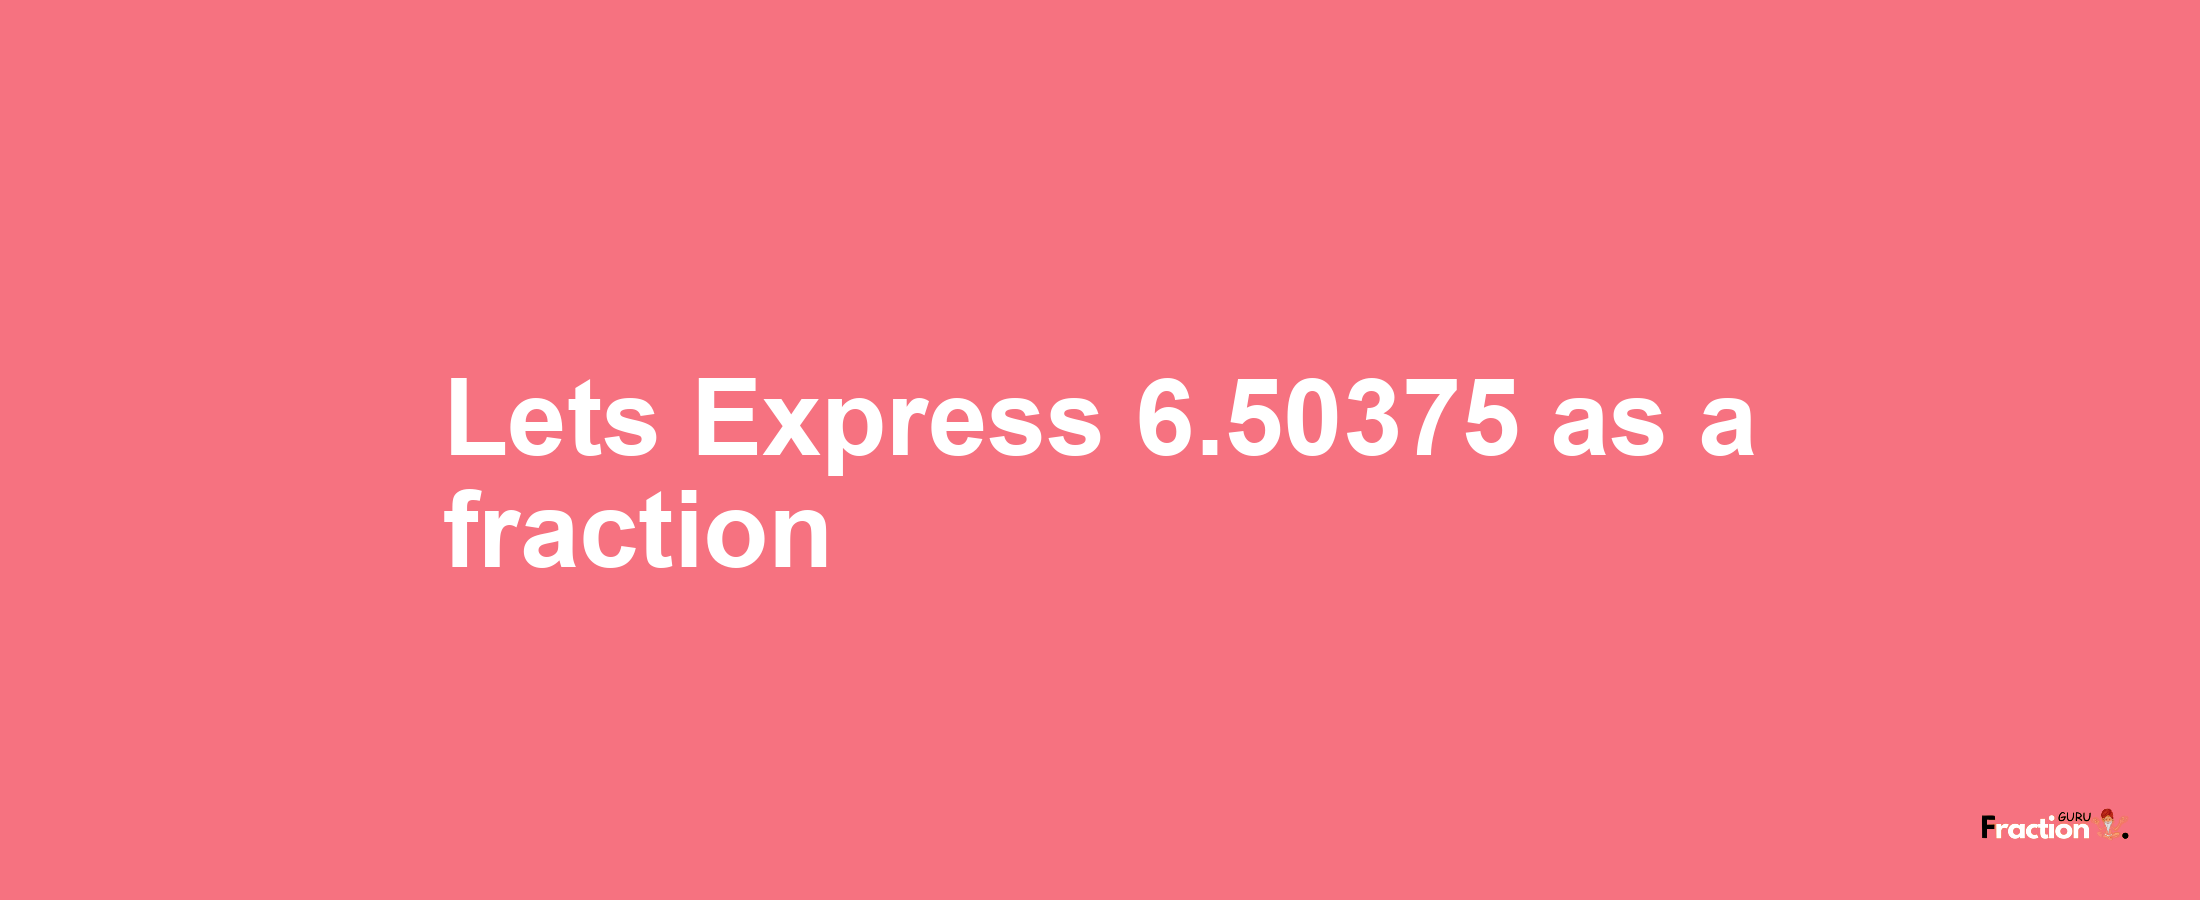 Lets Express 6.50375 as afraction